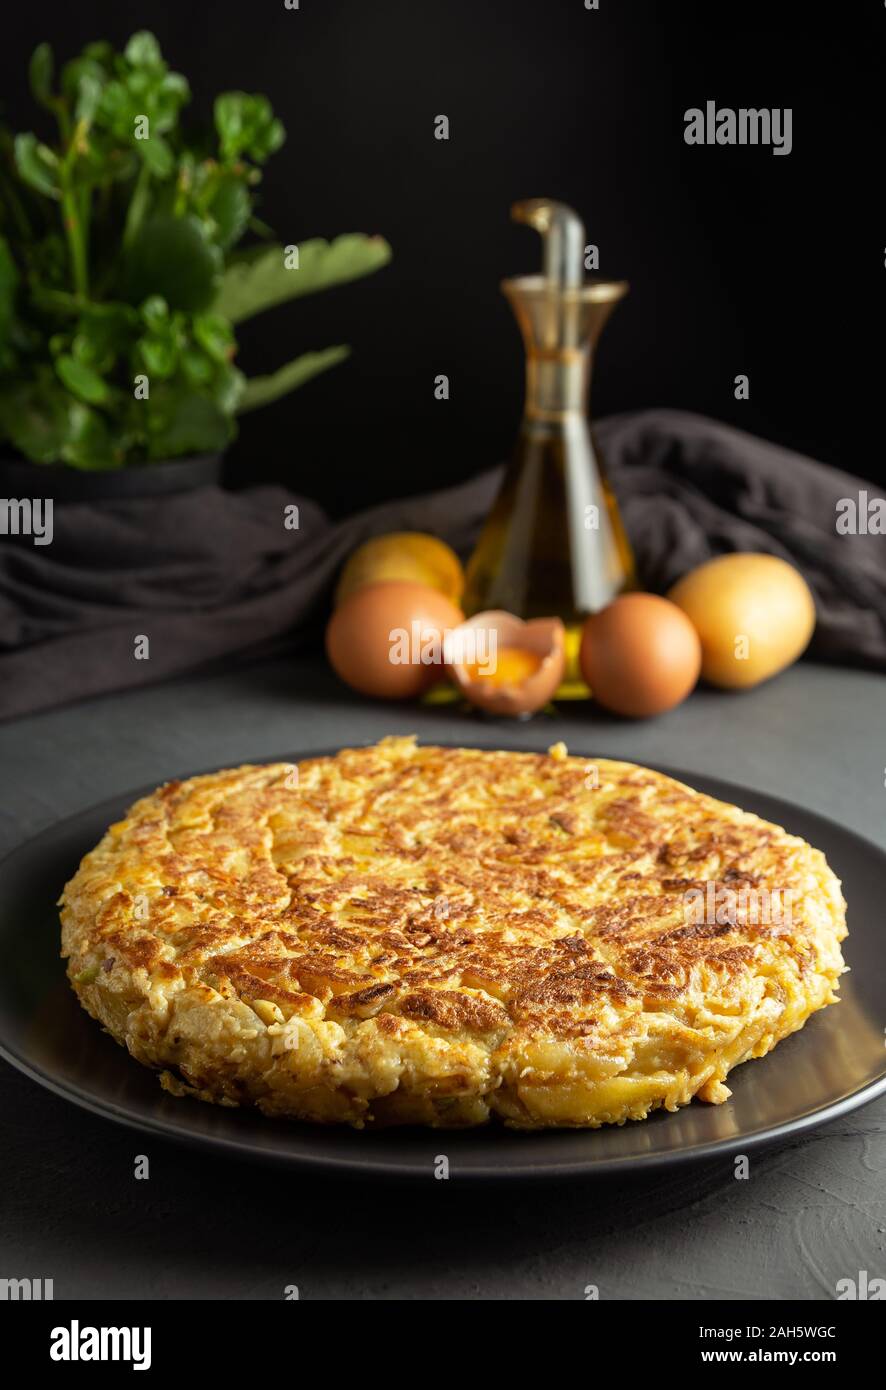 Potato omelet on dark wooden background, ingredients for preparation in the background Stock Photo